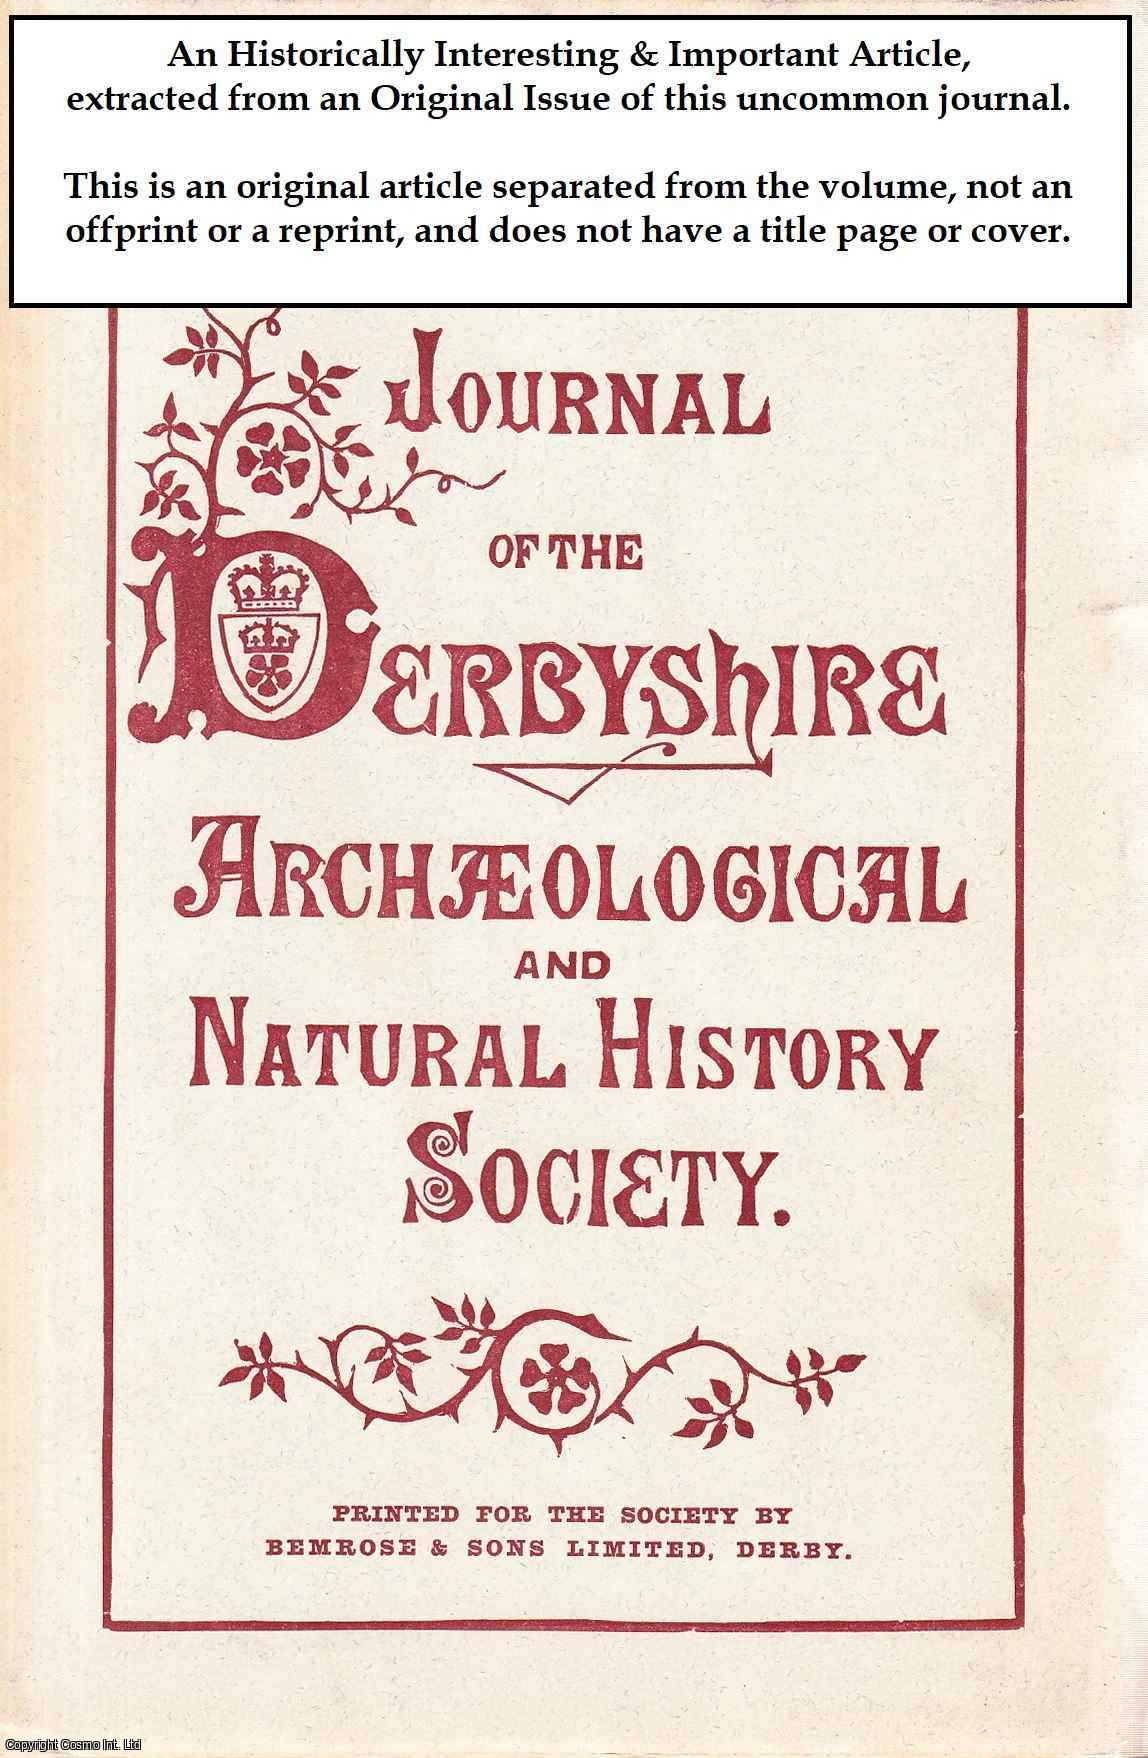 W. H. St. John Hope - The Excavations on The Site of Dale Abbey, Derbyshire. An original article from the Journal of the Derbyshire Archaeological & Natural History Society, 1880.